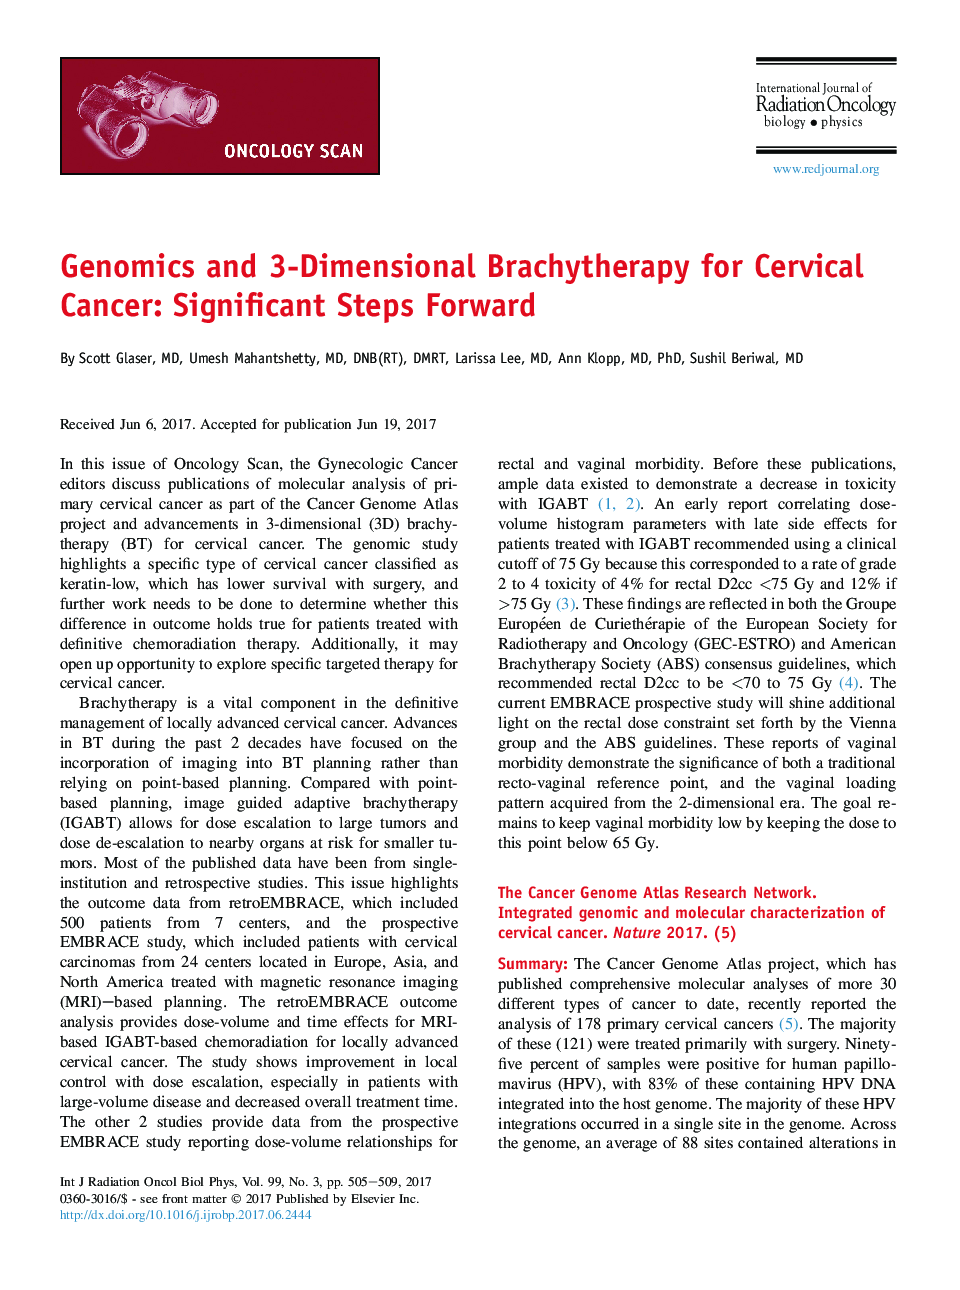 Genomics and 3-Dimensional Brachytherapy for Cervical Cancer: Significant Steps Forward